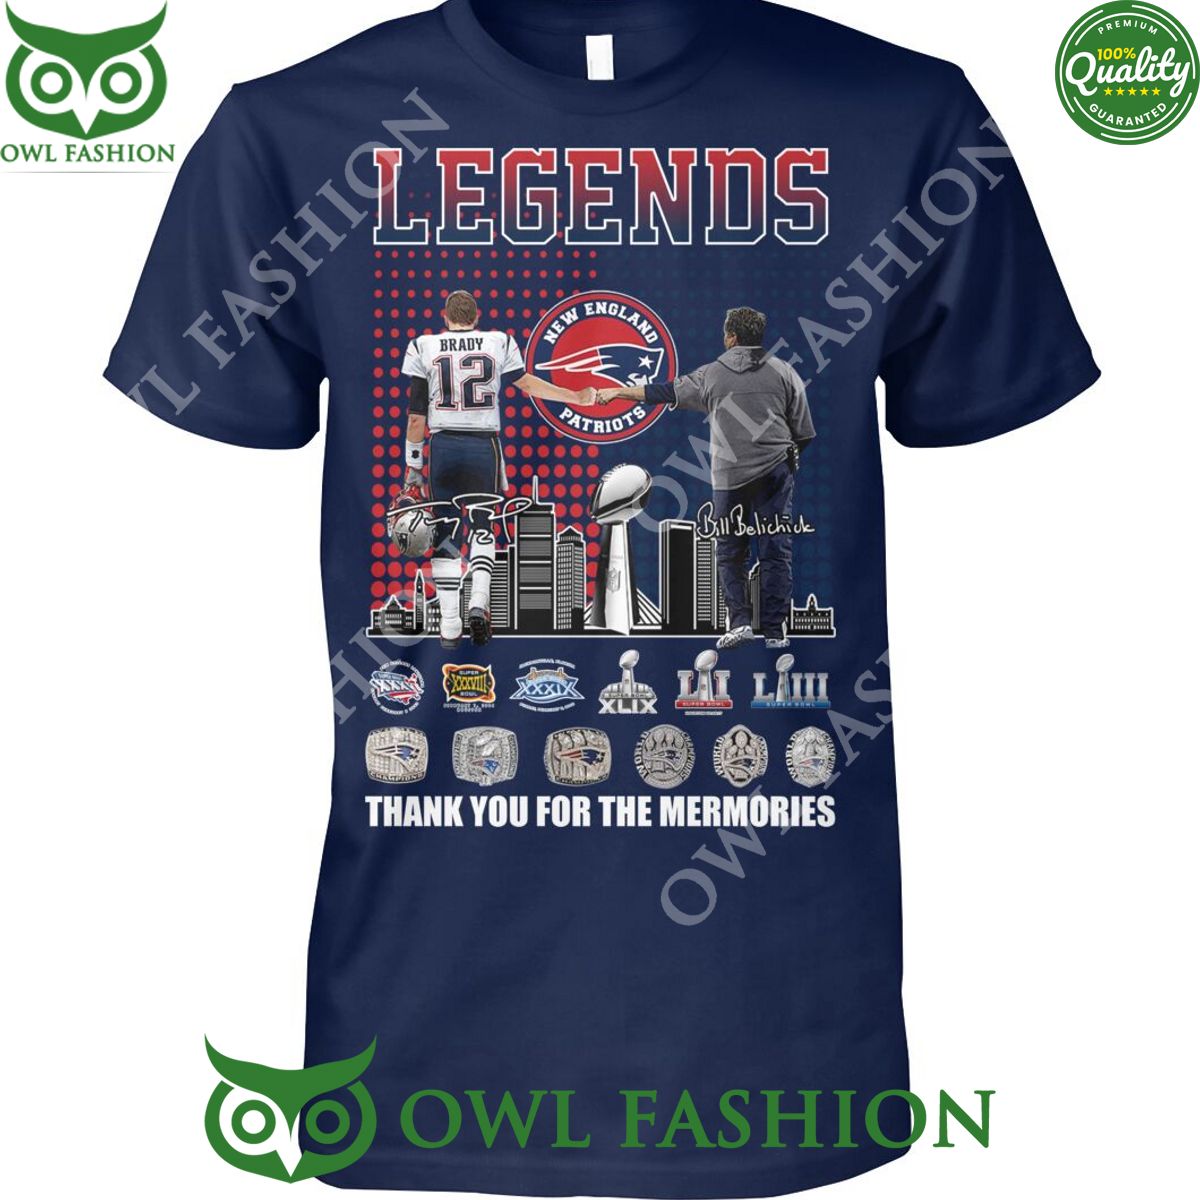 Tom Brady Bill Belichick Legends together New England Patriots thanks for memories victories t shirt